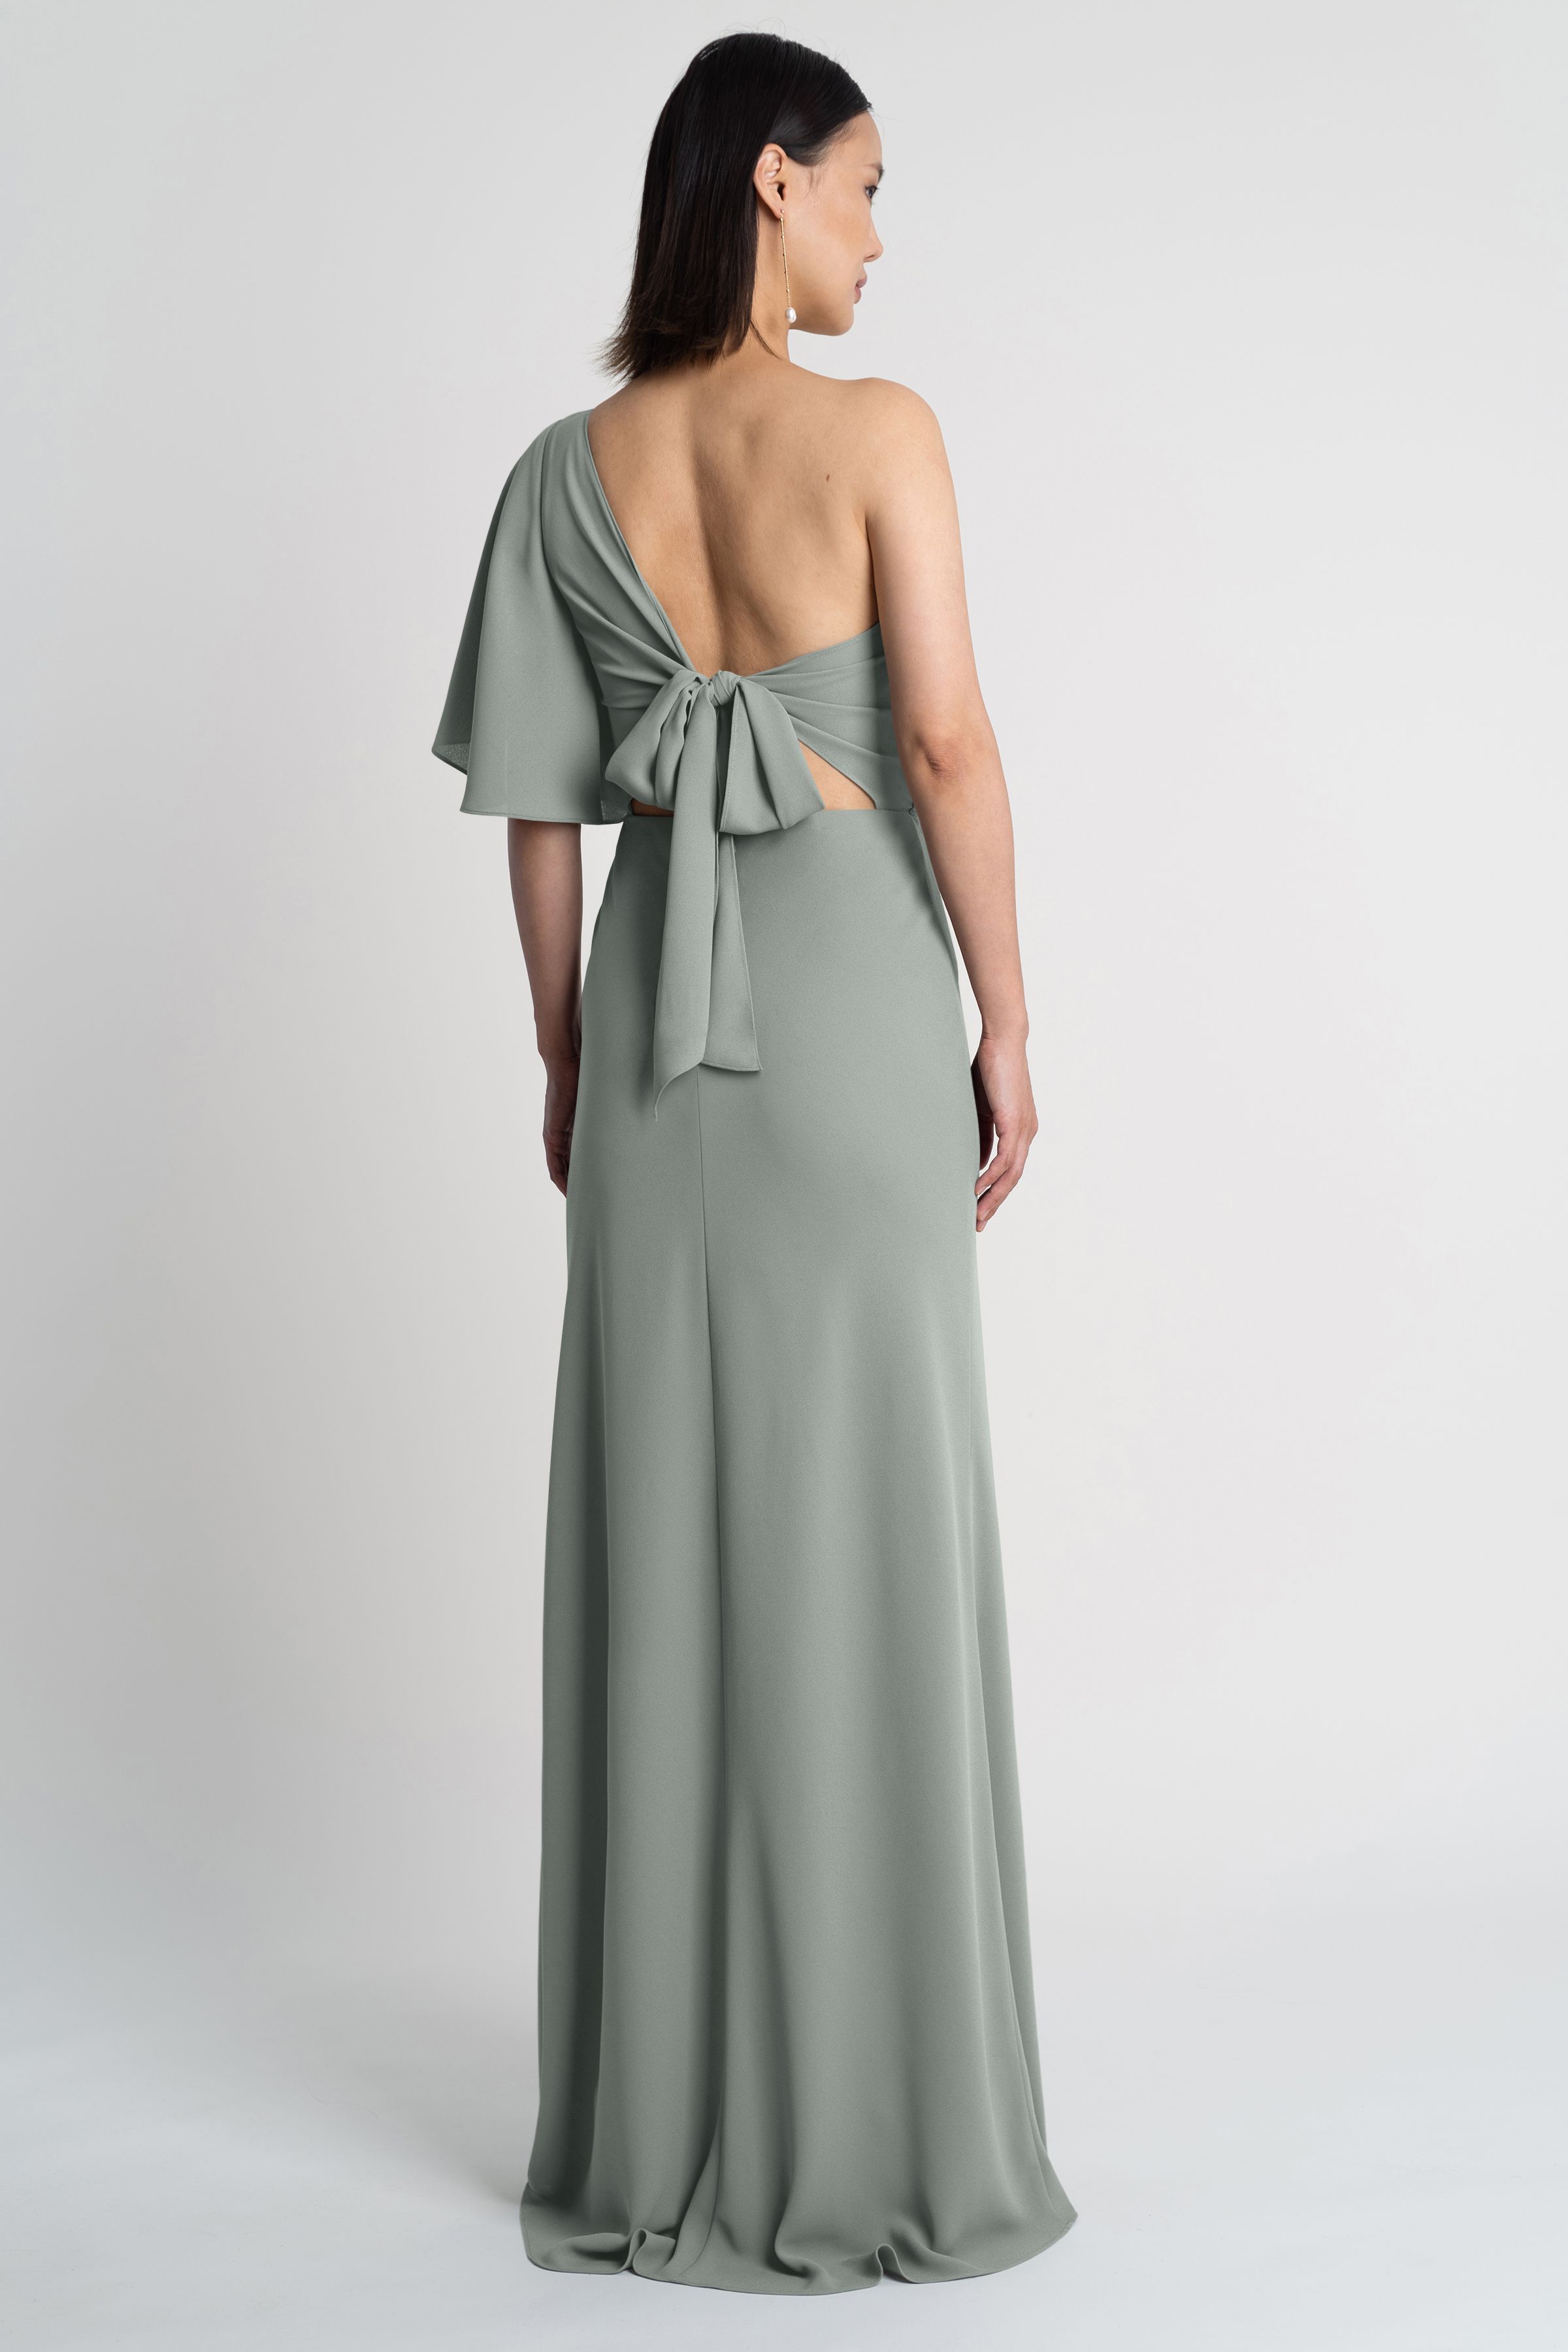 The Best Bridesmaid Dresses for Your Body Type  Dresses for broad shoulders,  Necklines for dresses, Womens prom dresses